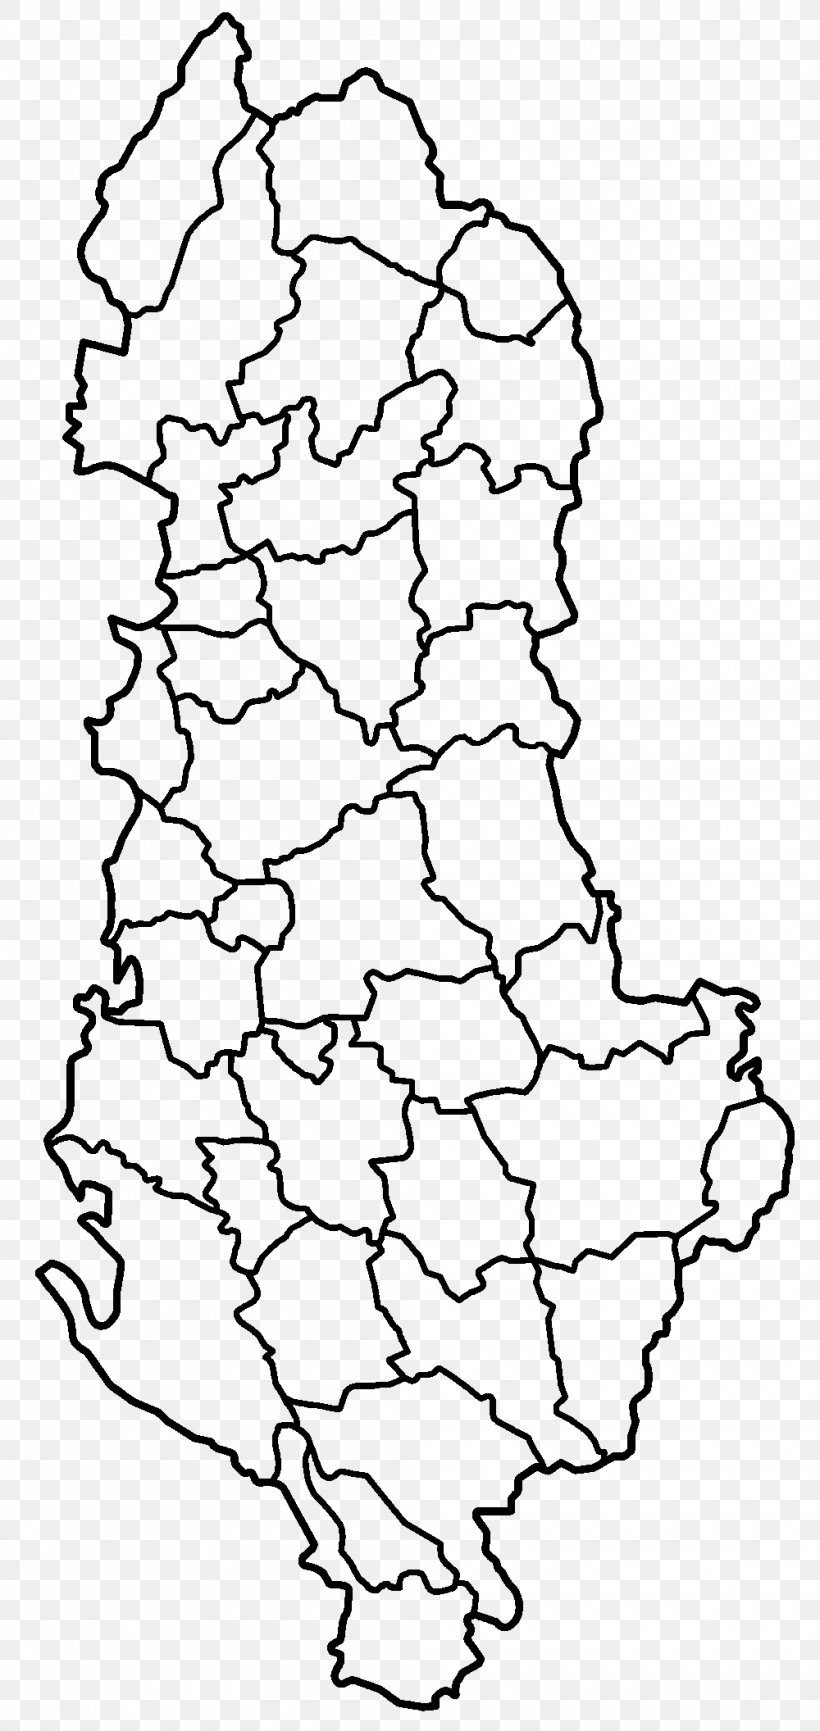 District Of Albania Wikipedia Blank Map, PNG, 1000x2112px, Albania, Albanian, Area, Black And White, Blank Map Download Free